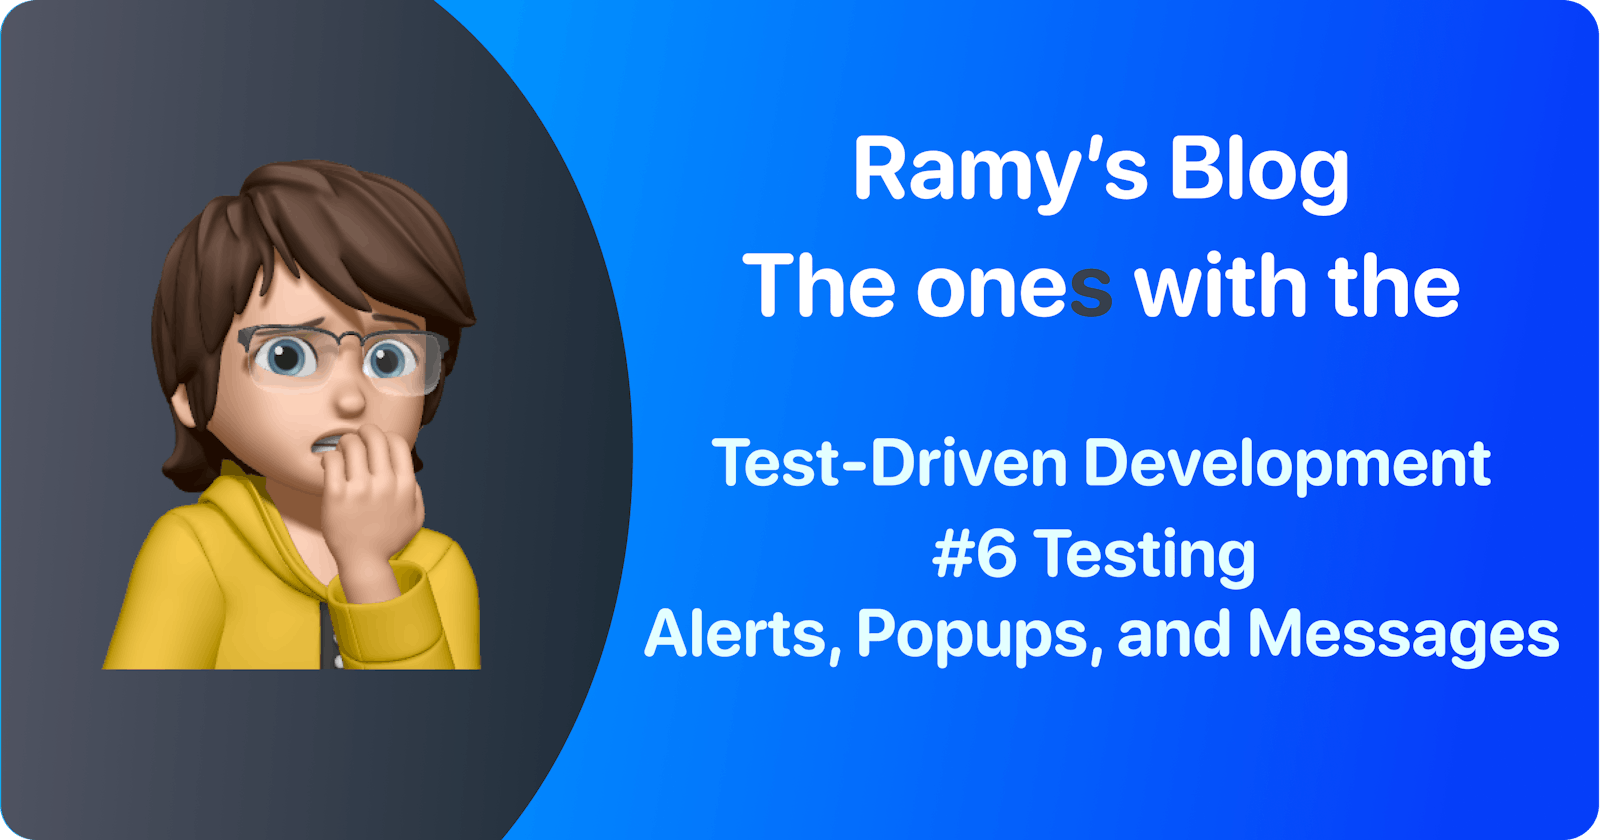 Test-Driven Development: #6 Testing Alerts, Popups, and Messages